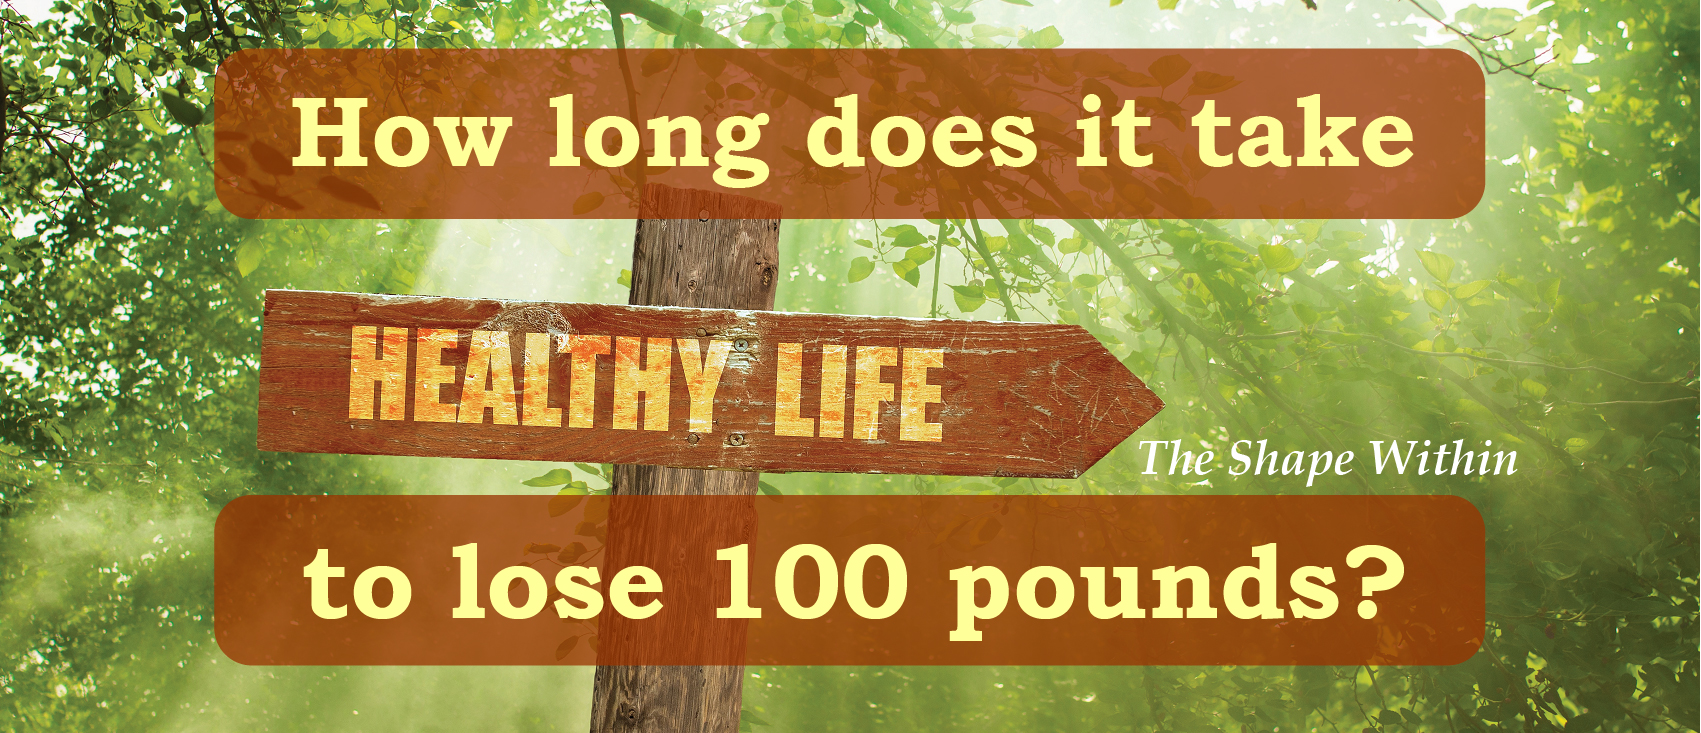 Learn how to lose 100 pounds in a year, the healthy way